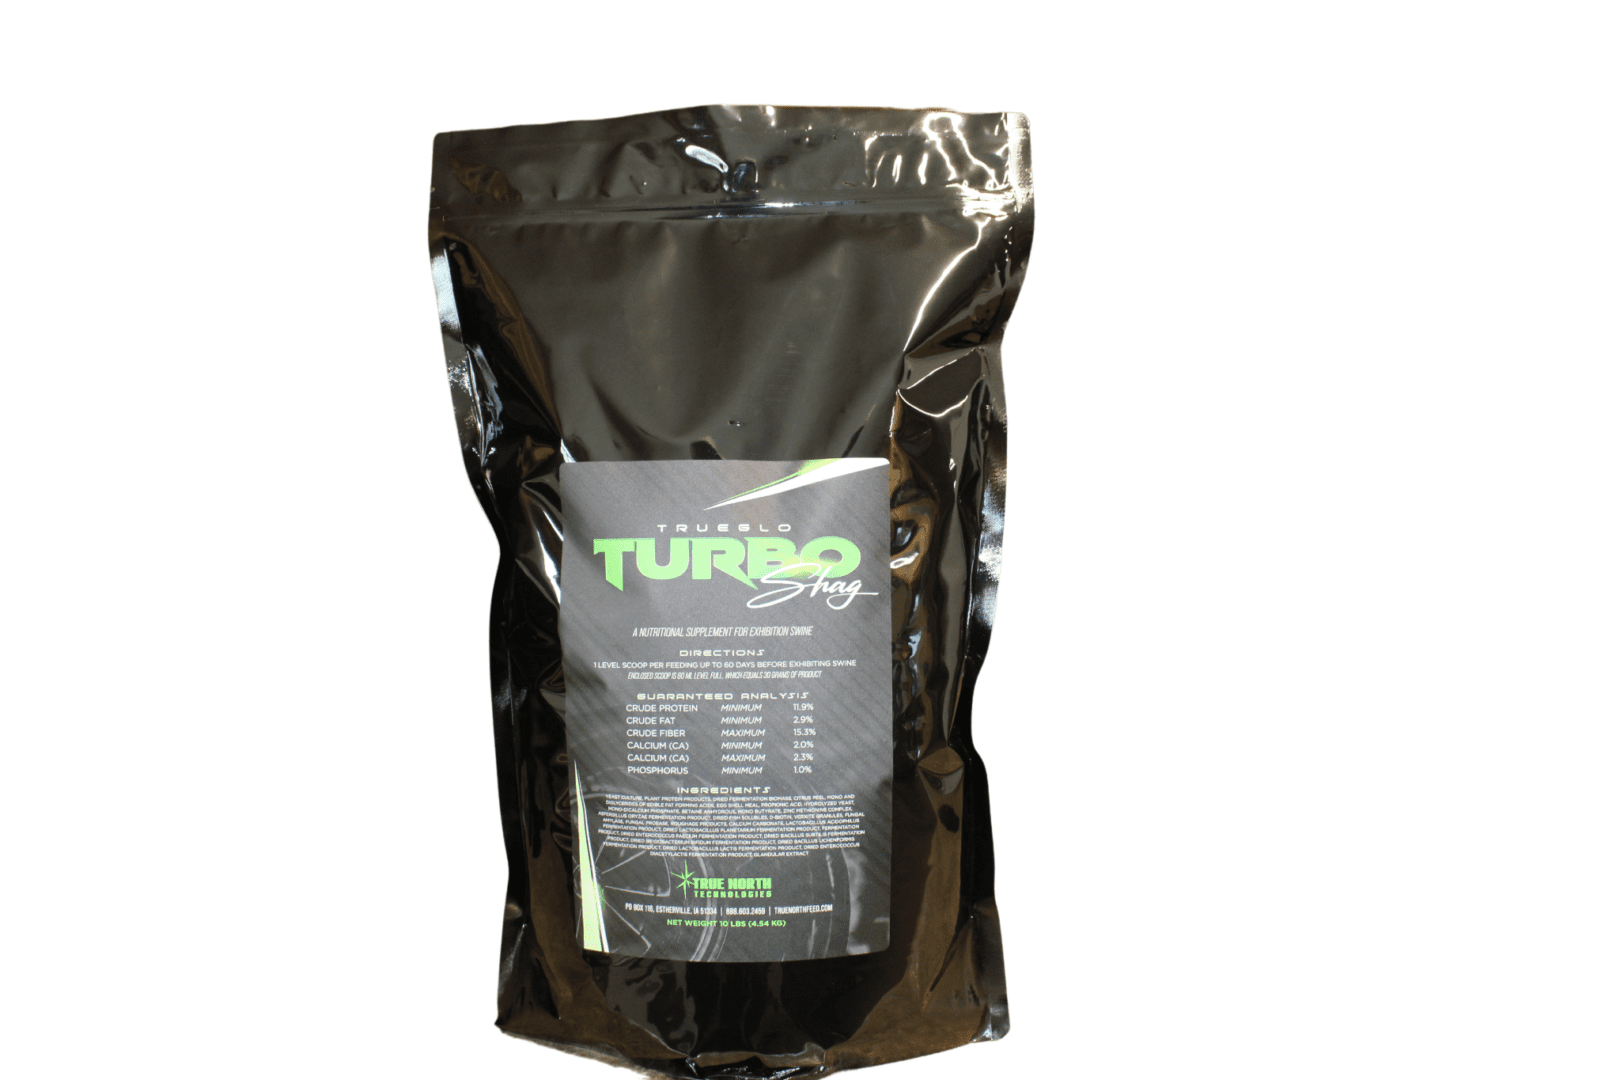 TrueGlo Turbo Shag supports appetite, stomach health, gut health,  skin, and hair. It has all the benefits of Turbo with melatonin to amp up hair growth